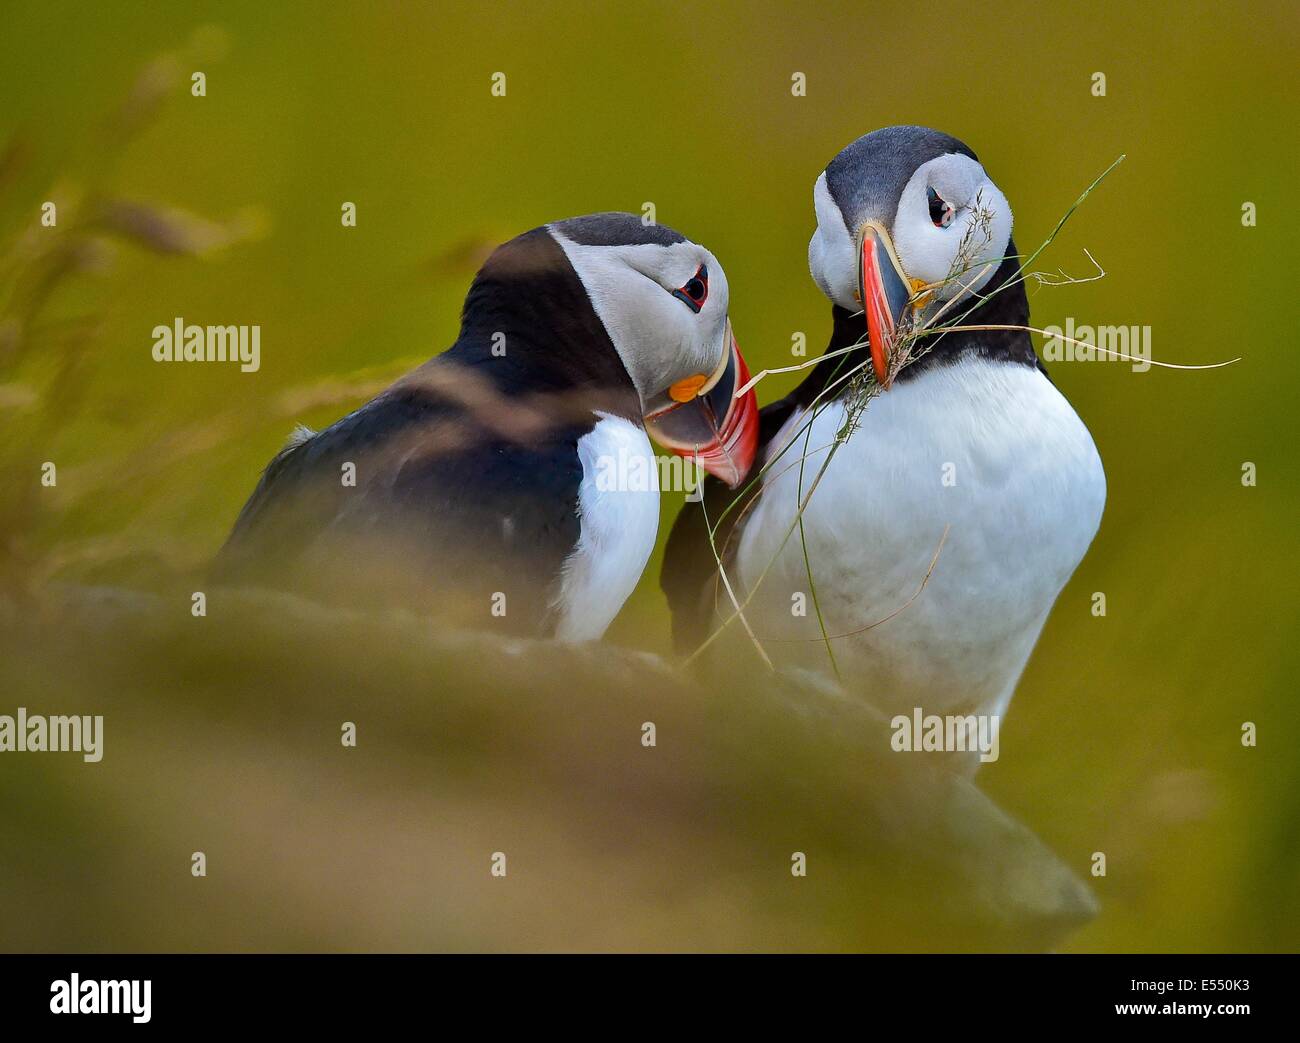 Alesund, Norway. 12th July, 2014. Two Atlantic puffins (Fratercula arctica) is pictured on Norwegian island Runde (Goksøyr) near Alesund, Norway, 12 July 2014. The Atlantic puffin is about as tall as a domestic pigeon. Photo: Patrick Pleul/dpa/Alamy Live News Stock Photo